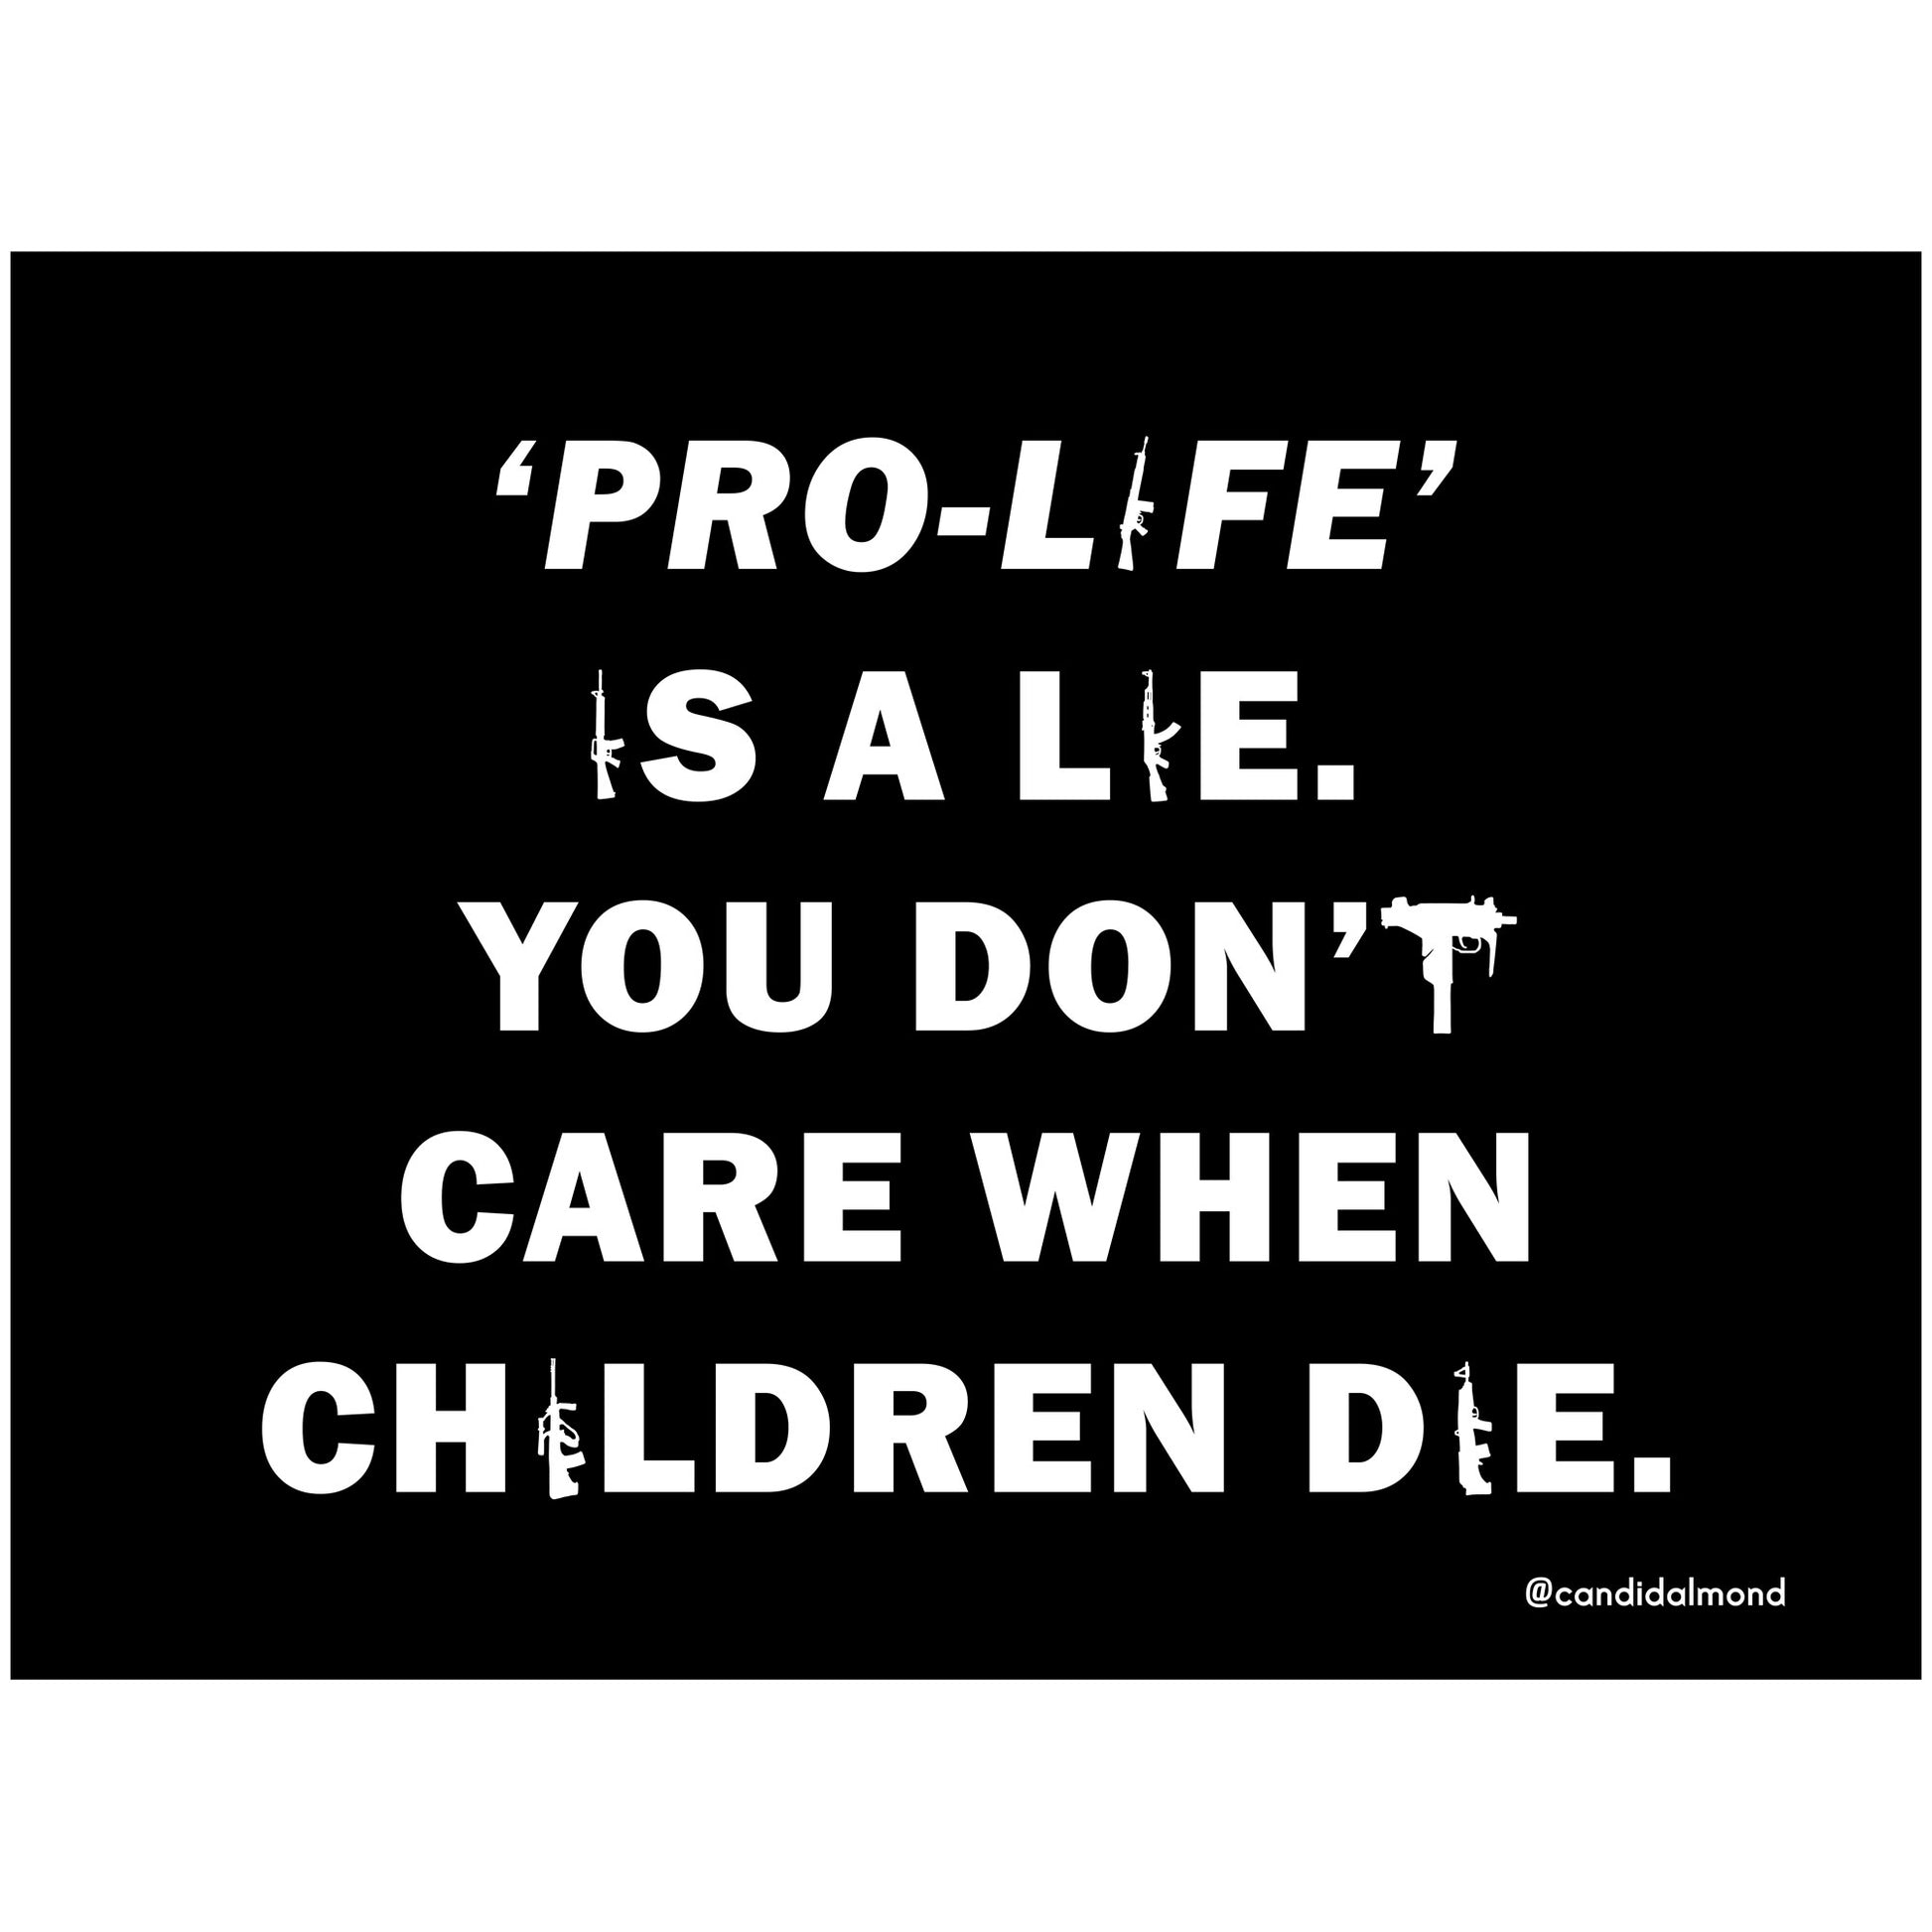 Abortion rights and gun control protest poster that reads, "'Pro-Life' Is A Lie. You Don't Care When Children Die."